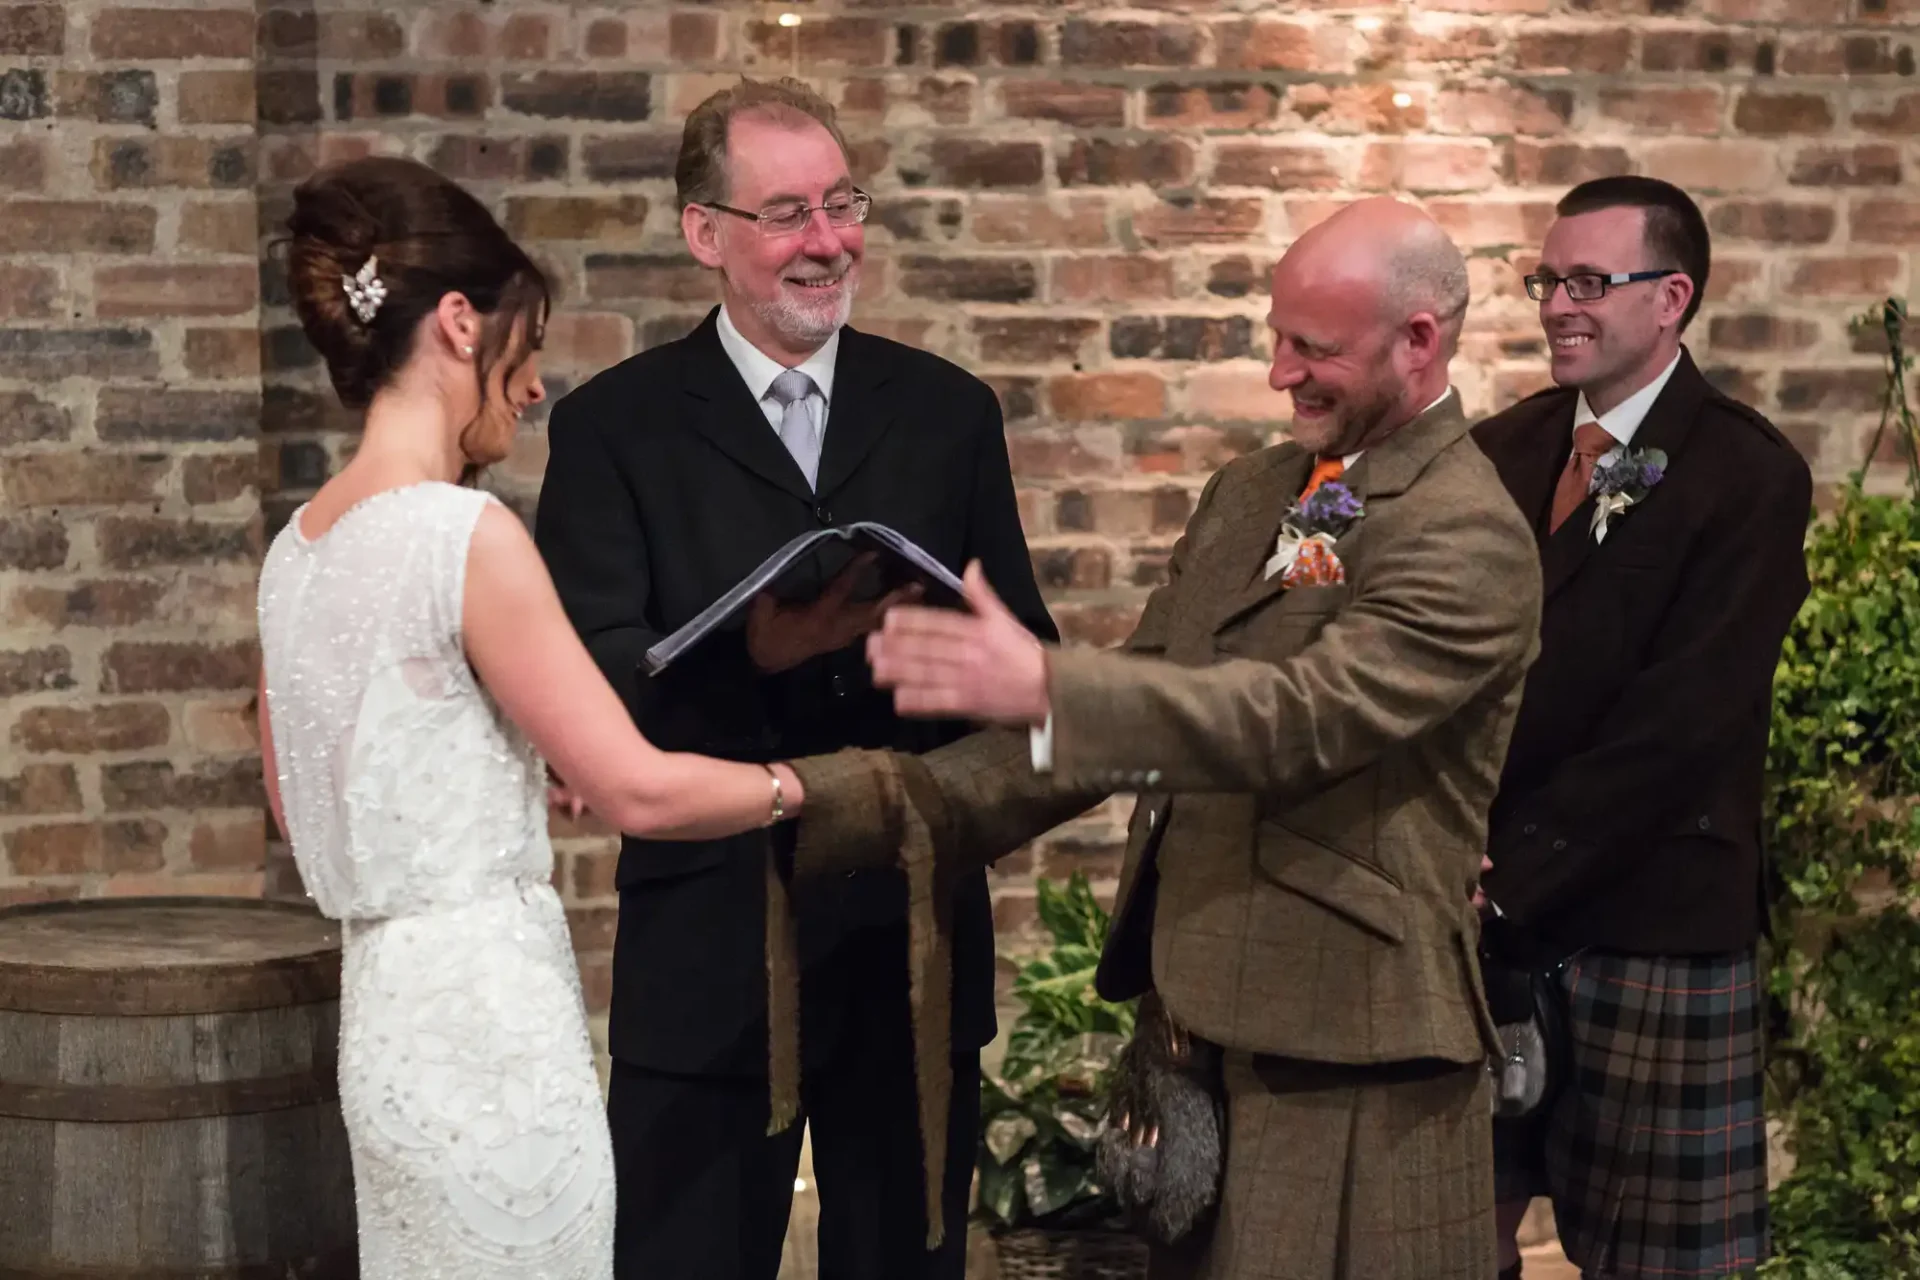 Bride and groom smiling at each other during their wedding ceremony, officiated by a man holding a book, with a guest smiling in the background.